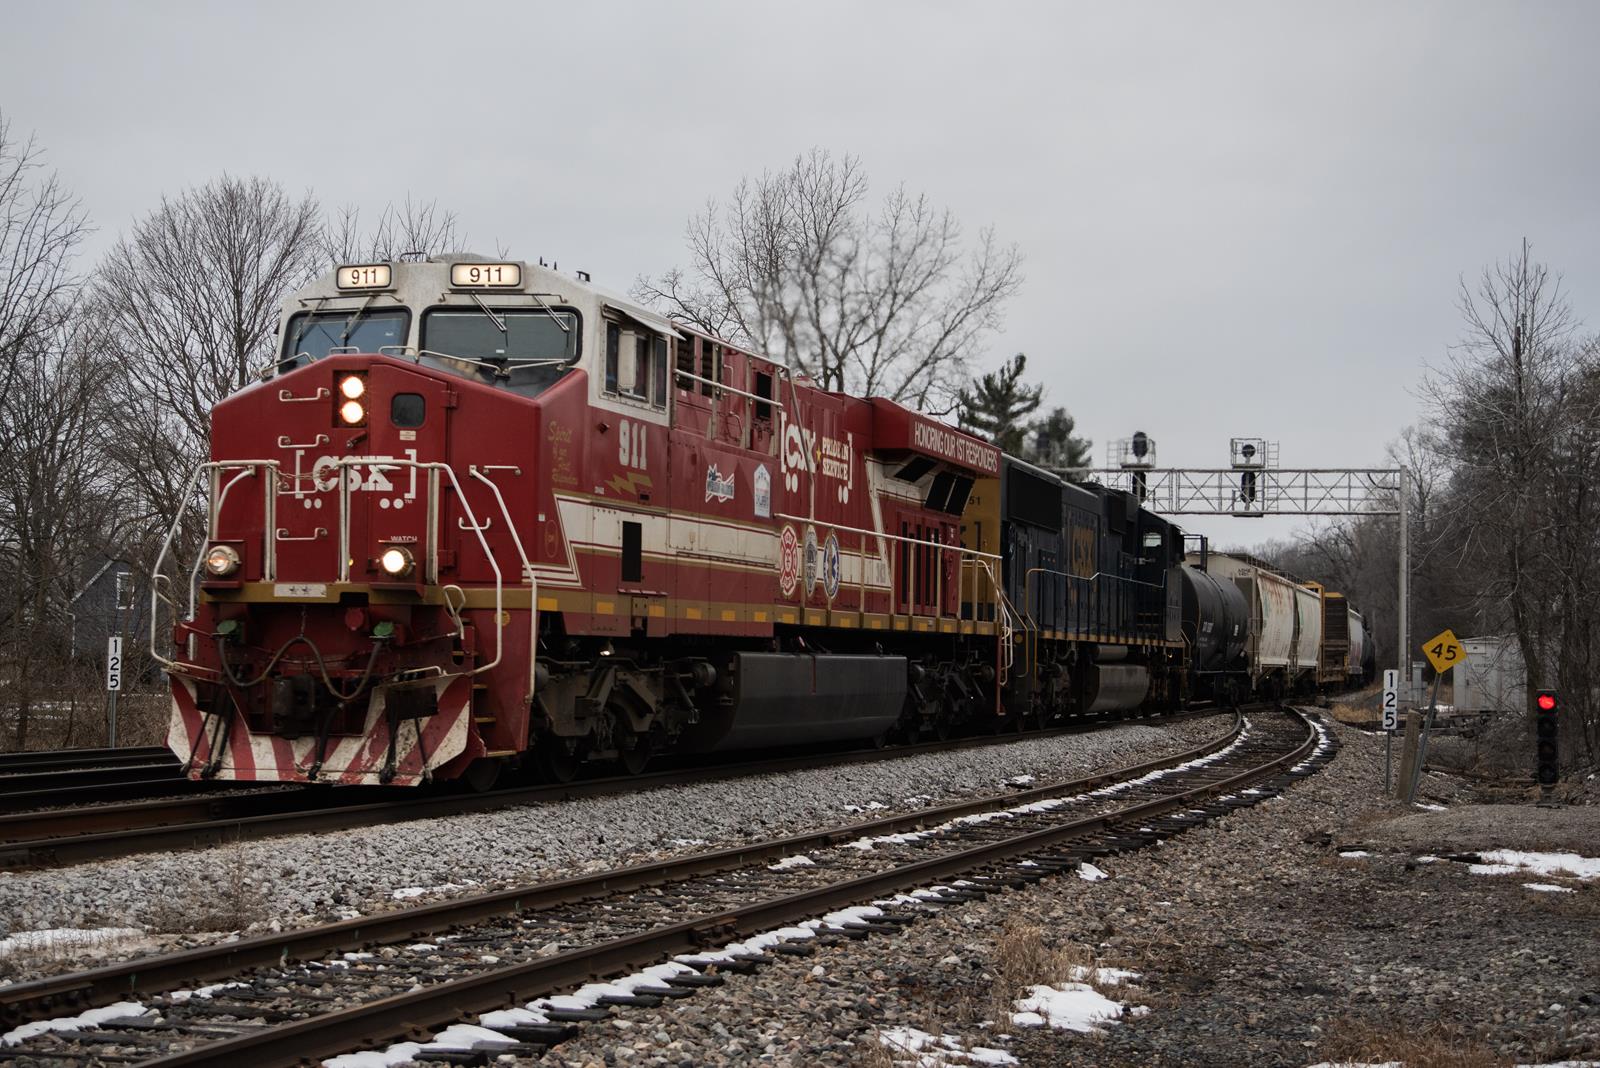 CSXT 911 is a class GE ES44AC and  is pictured in Auburn, Indiana, USA.  This was taken along the Garrett Subdivision on the CSX Transportation. Photo Copyright: Spencer Harman uploaded to Railroad Gallery on 12/29/2022. This photograph of CSXT 911 was taken on Thursday, December 29, 2022. All Rights Reserved. 